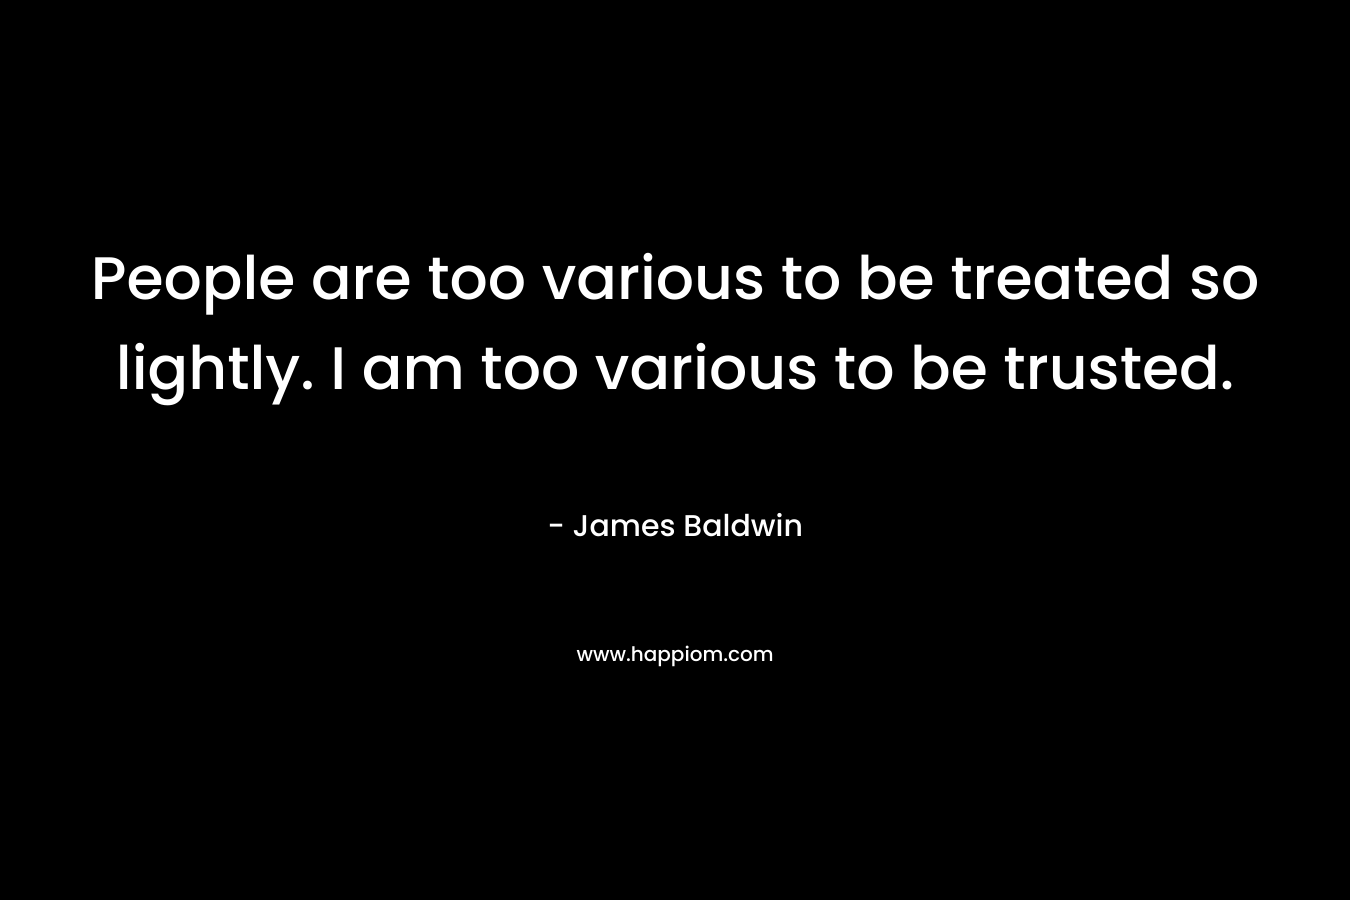 People are too various to be treated so lightly. I am too various to be trusted.